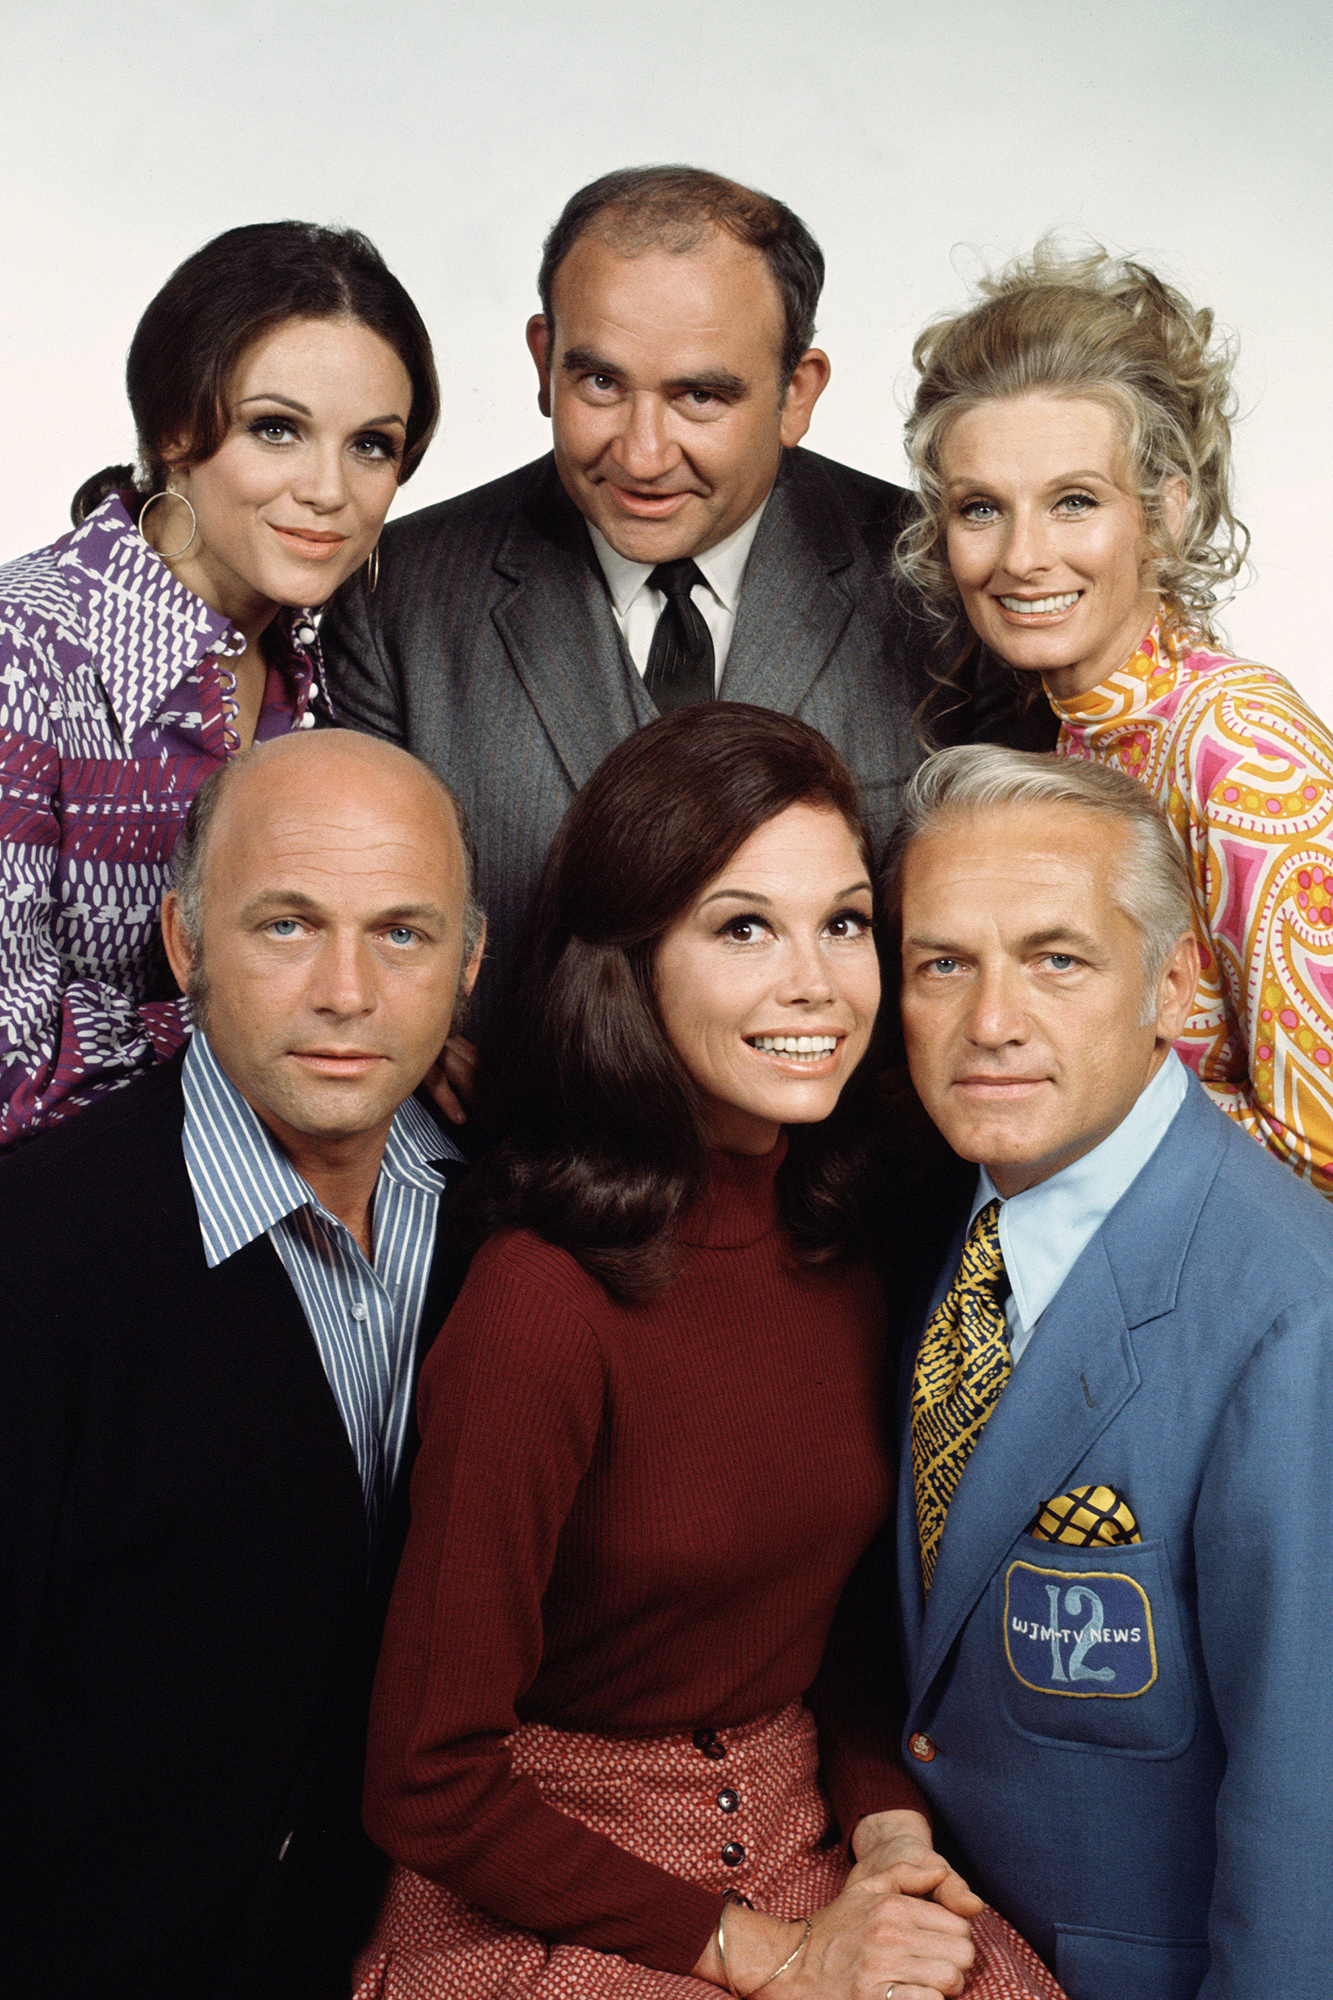 Clockwise from top left: Valerie Harper, Ed Asner, Cloris Leachman, Ted Knight, Mary Tyler Moore and Gavin MacLeod in a promo image from The Mary Tyler Moore Show in 1972.